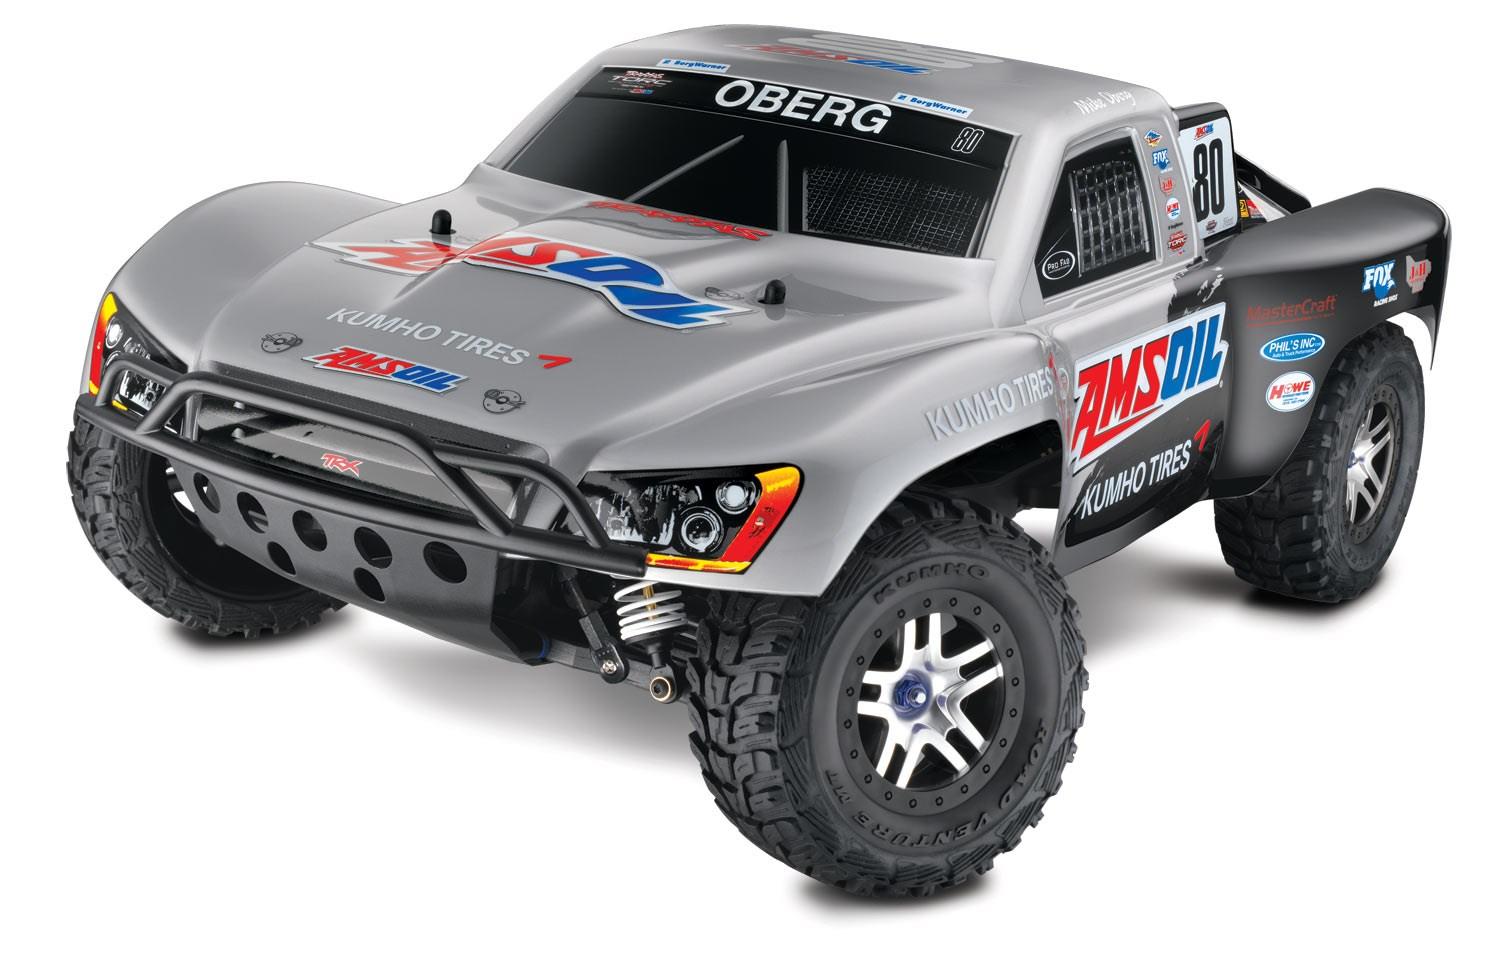 Foto Traxxas 6807 Slash Ultimate VXL Brushless 4WD 2.4GHz RTR modelismo coches rc (Plata)